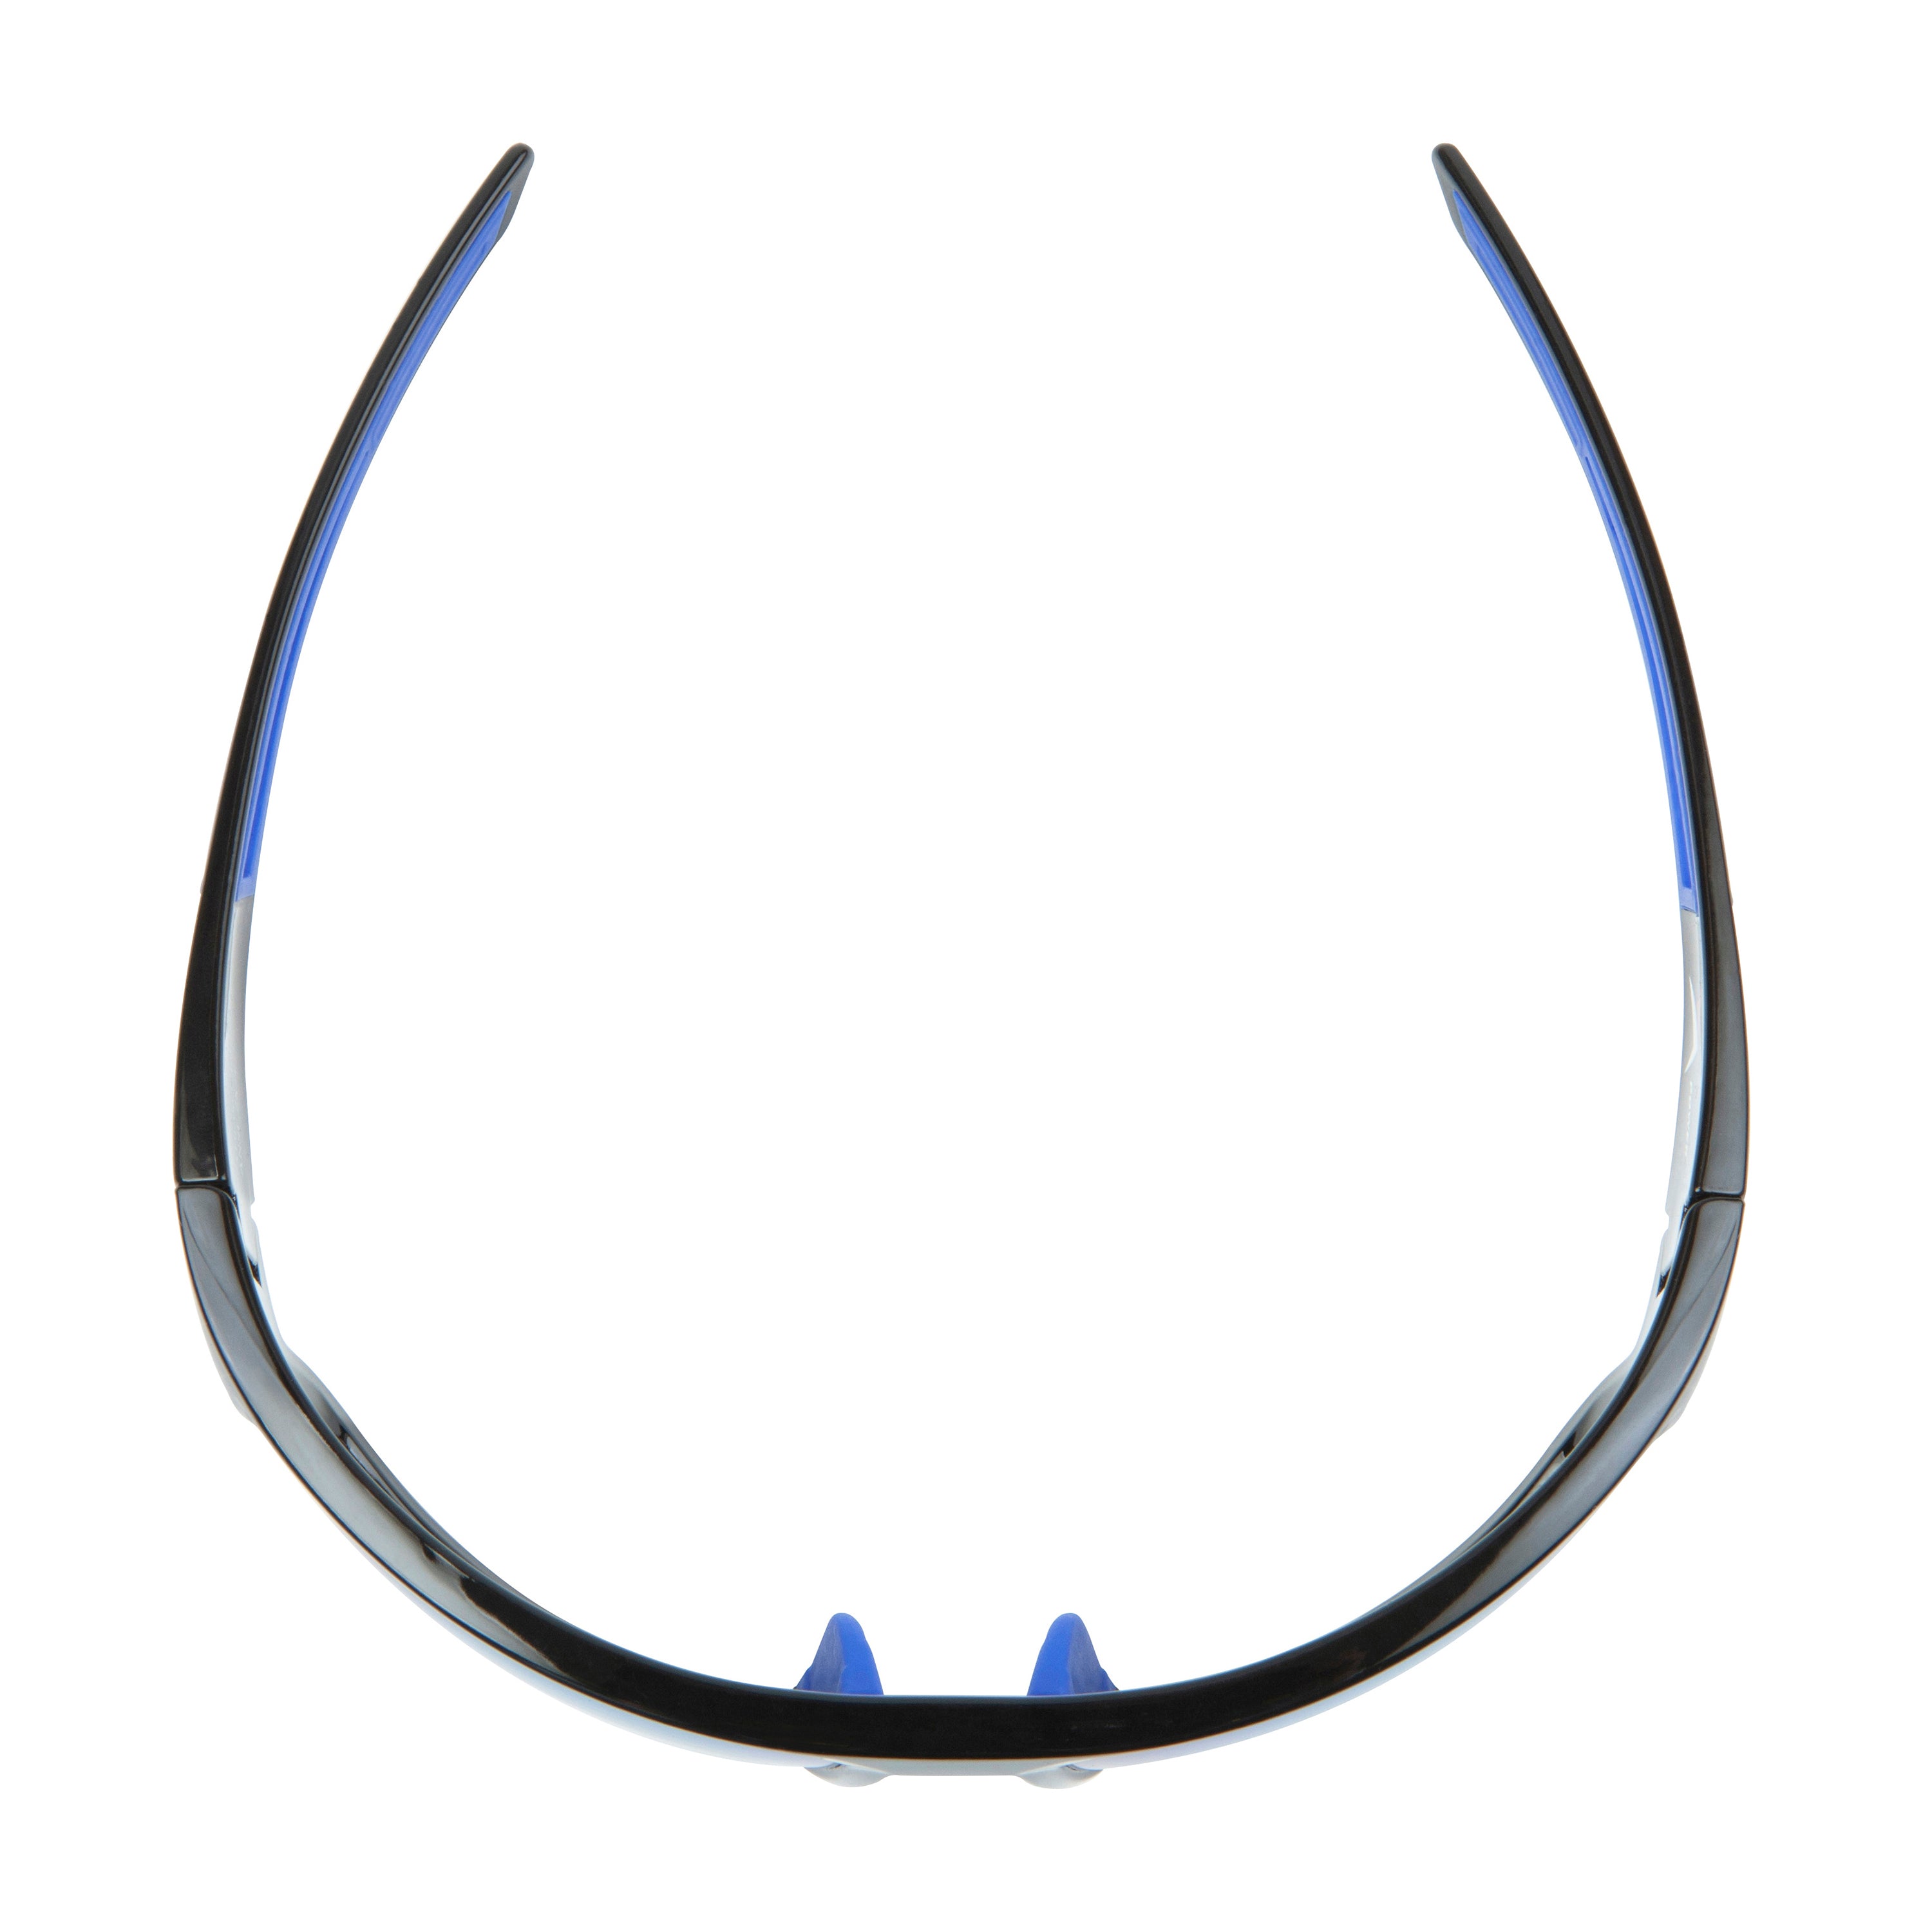 Clear Lens Sport Safety Sunglasses with Blue Rubber Accents.